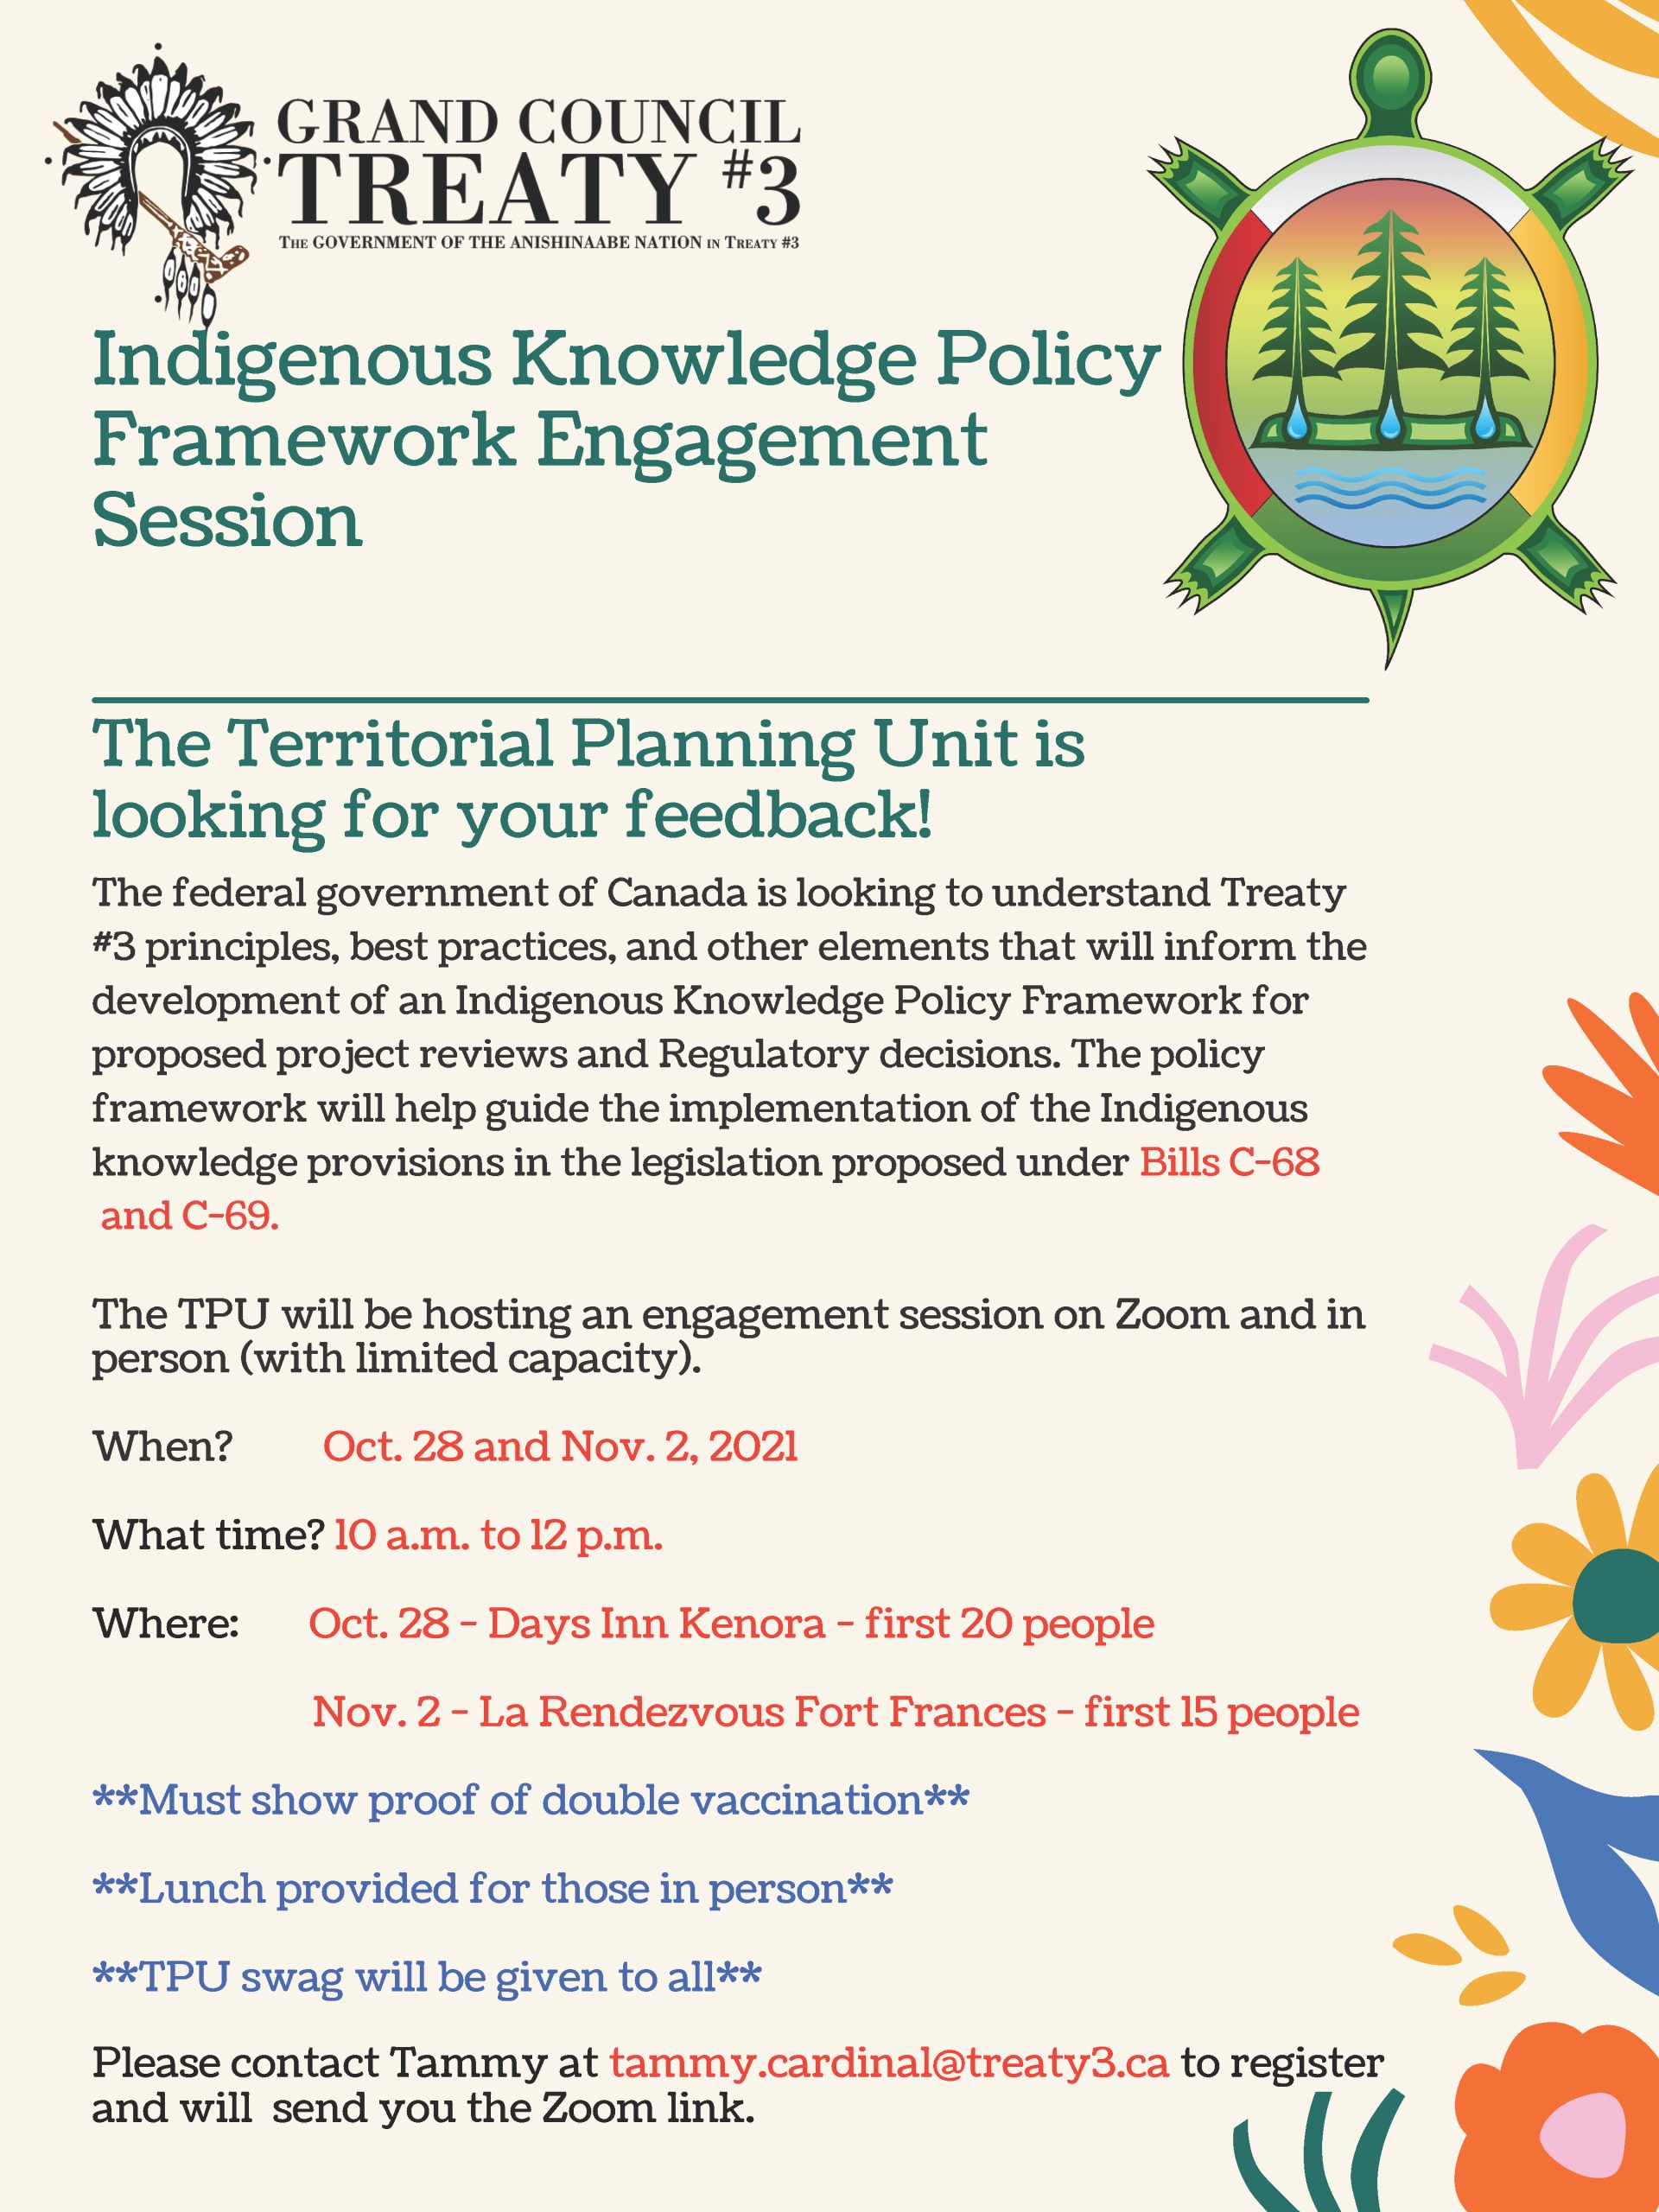 Indigenous Knowledge Policy Framework Engagement Session